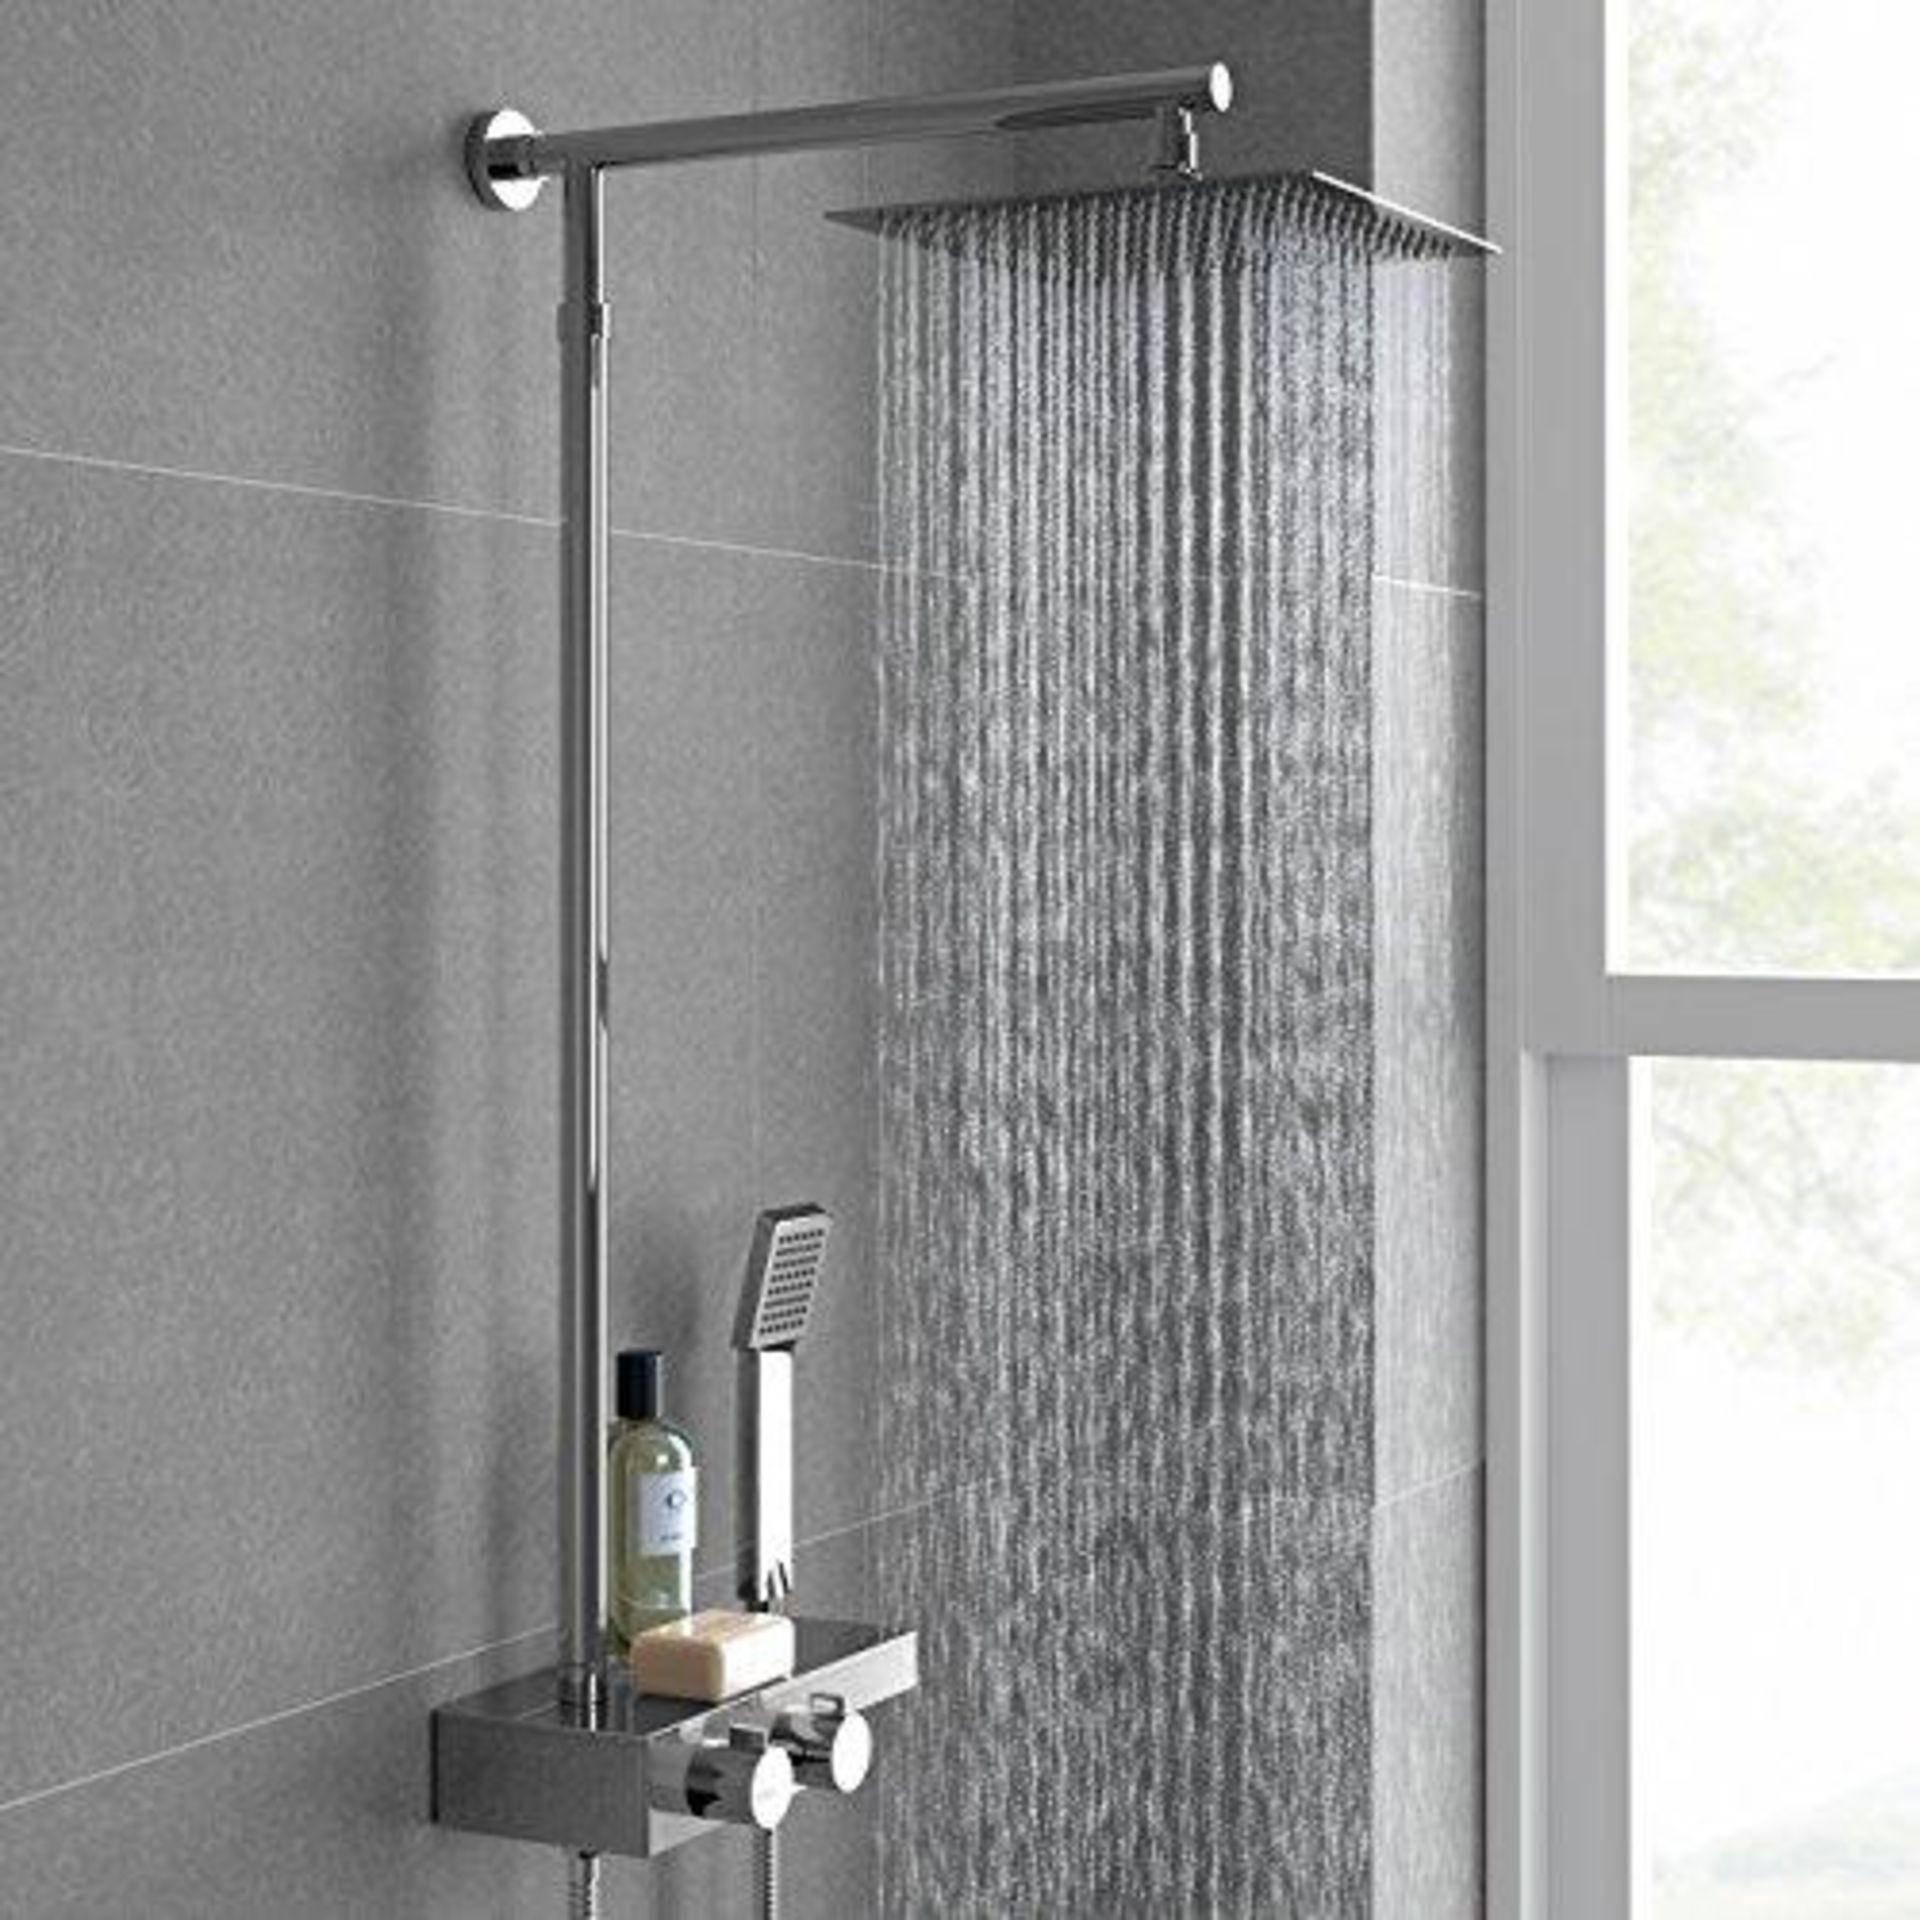 New & Boxed Square Thermostatic Bar Mixer Shower Set Valve With Shelf 10" Head + Handset. RRP £499.